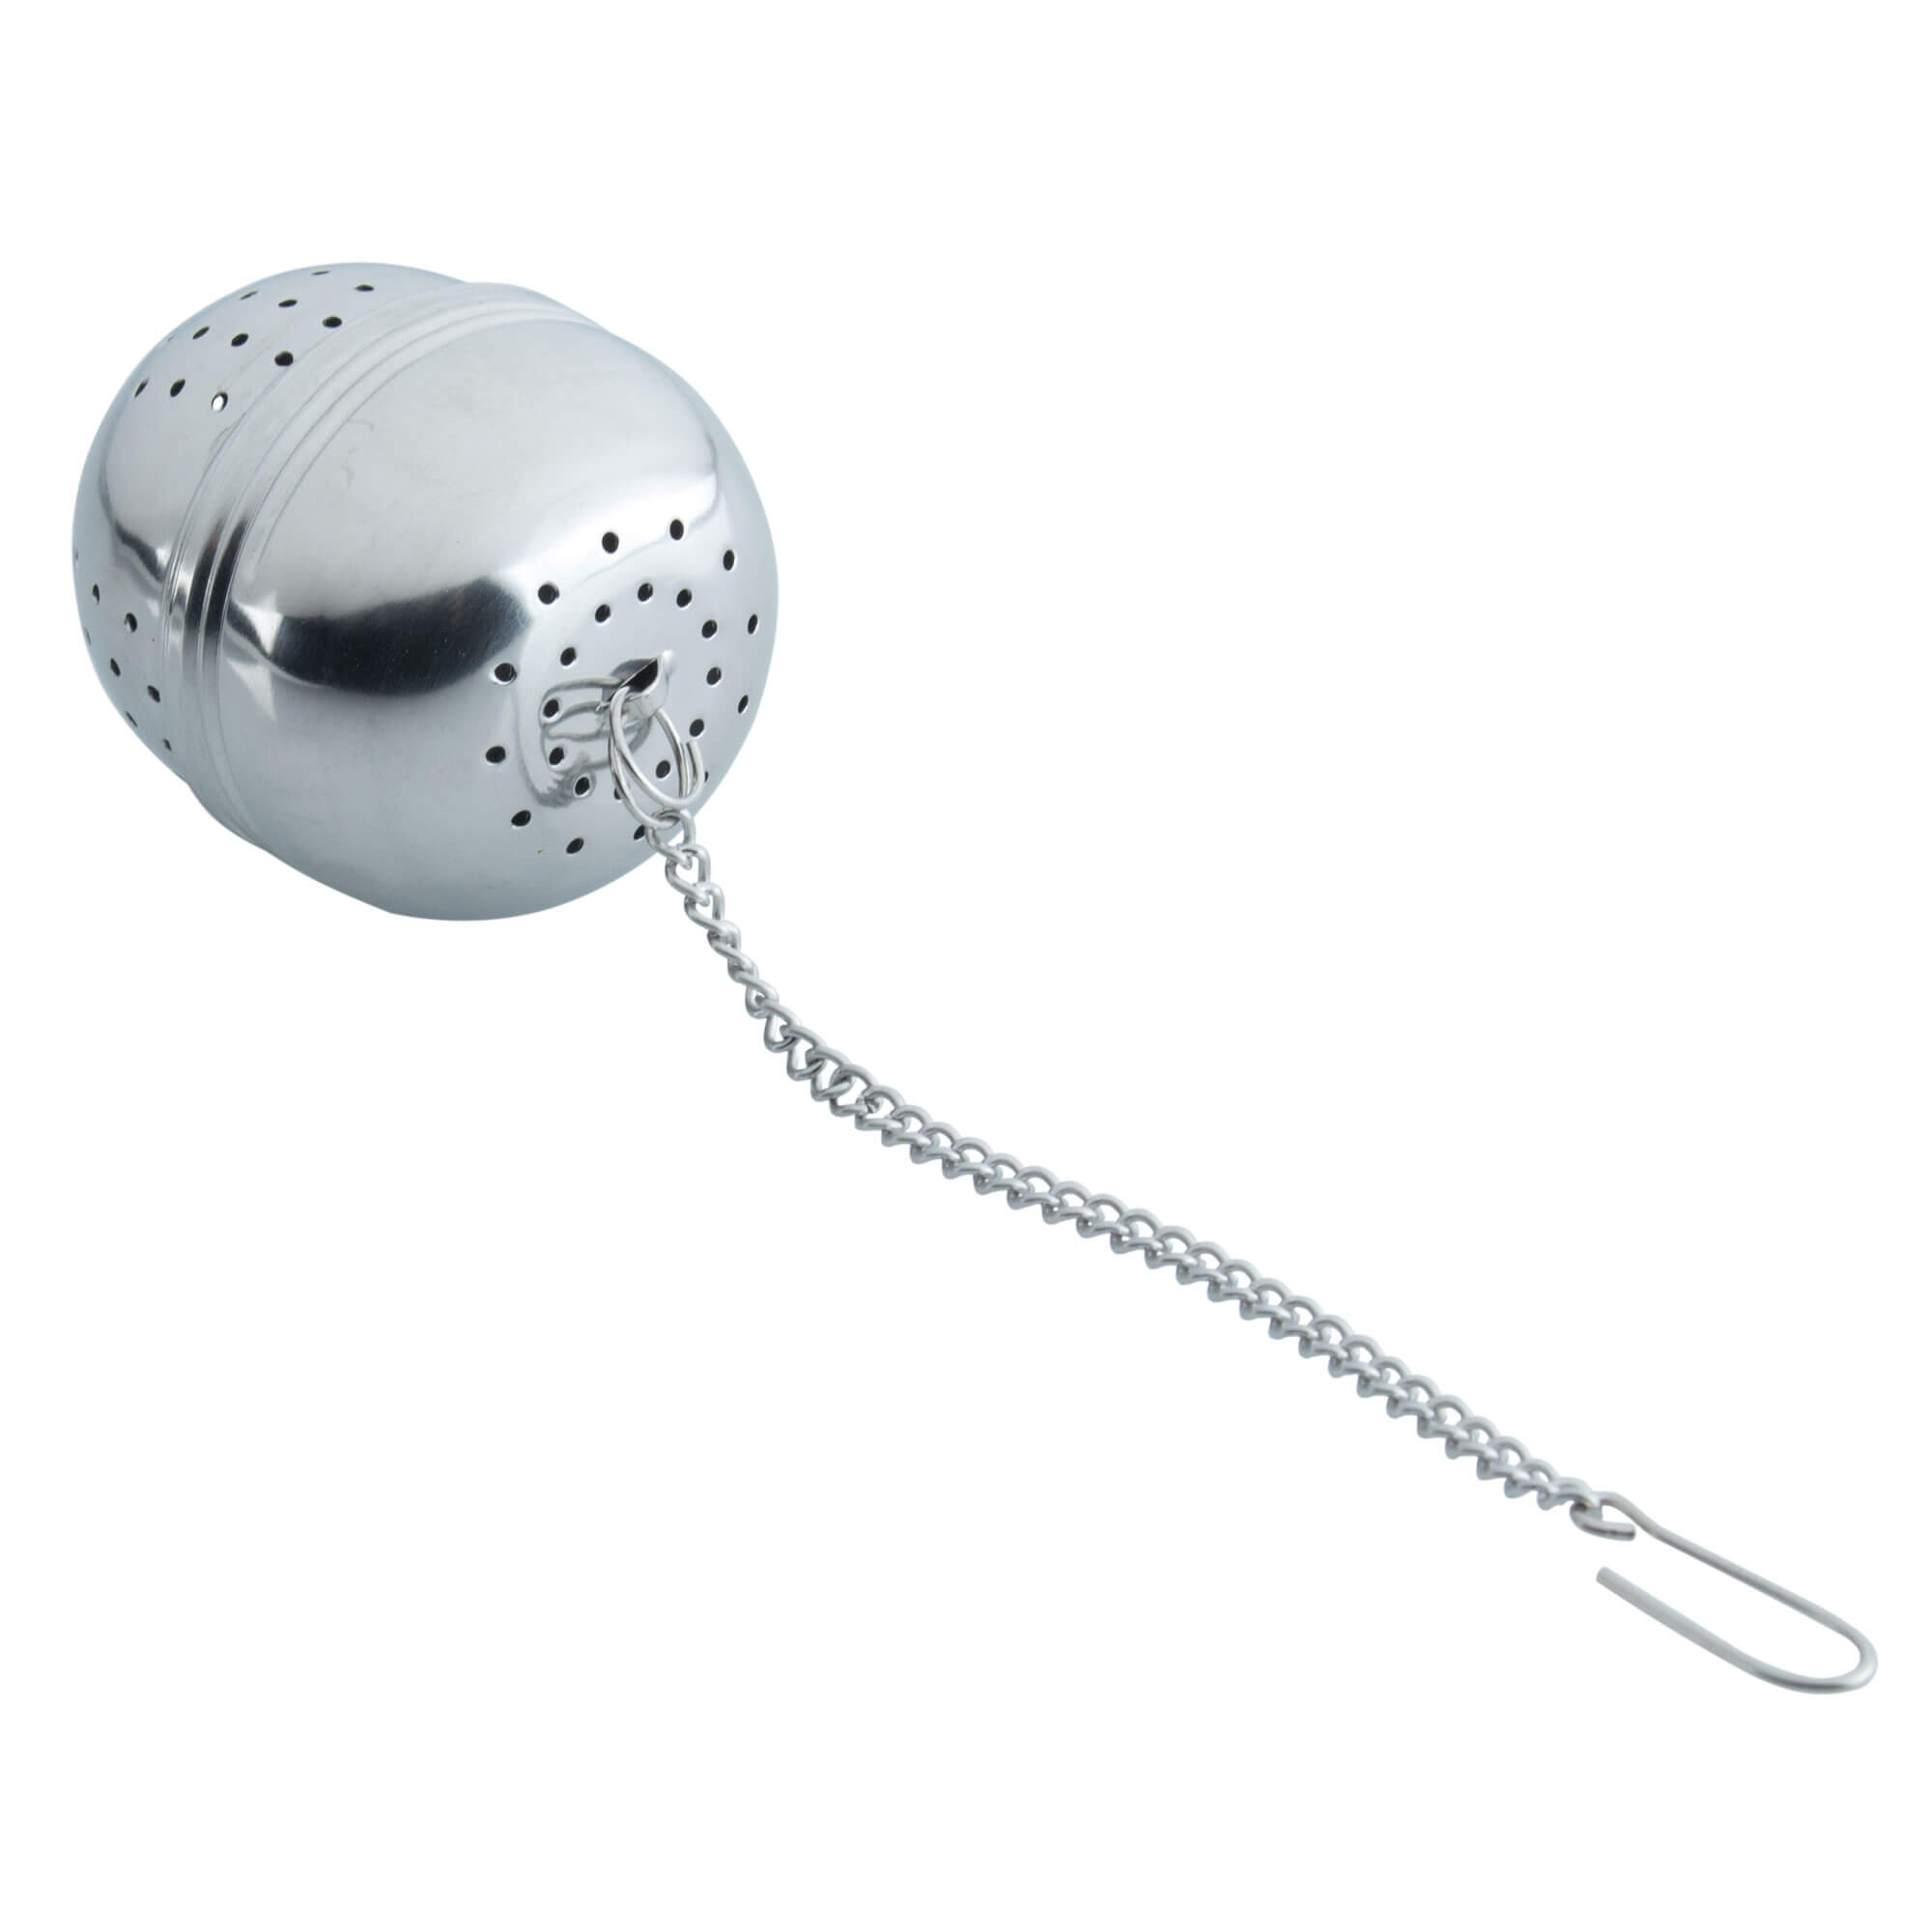 Tea infuser with chain, stainless steel - 4cm